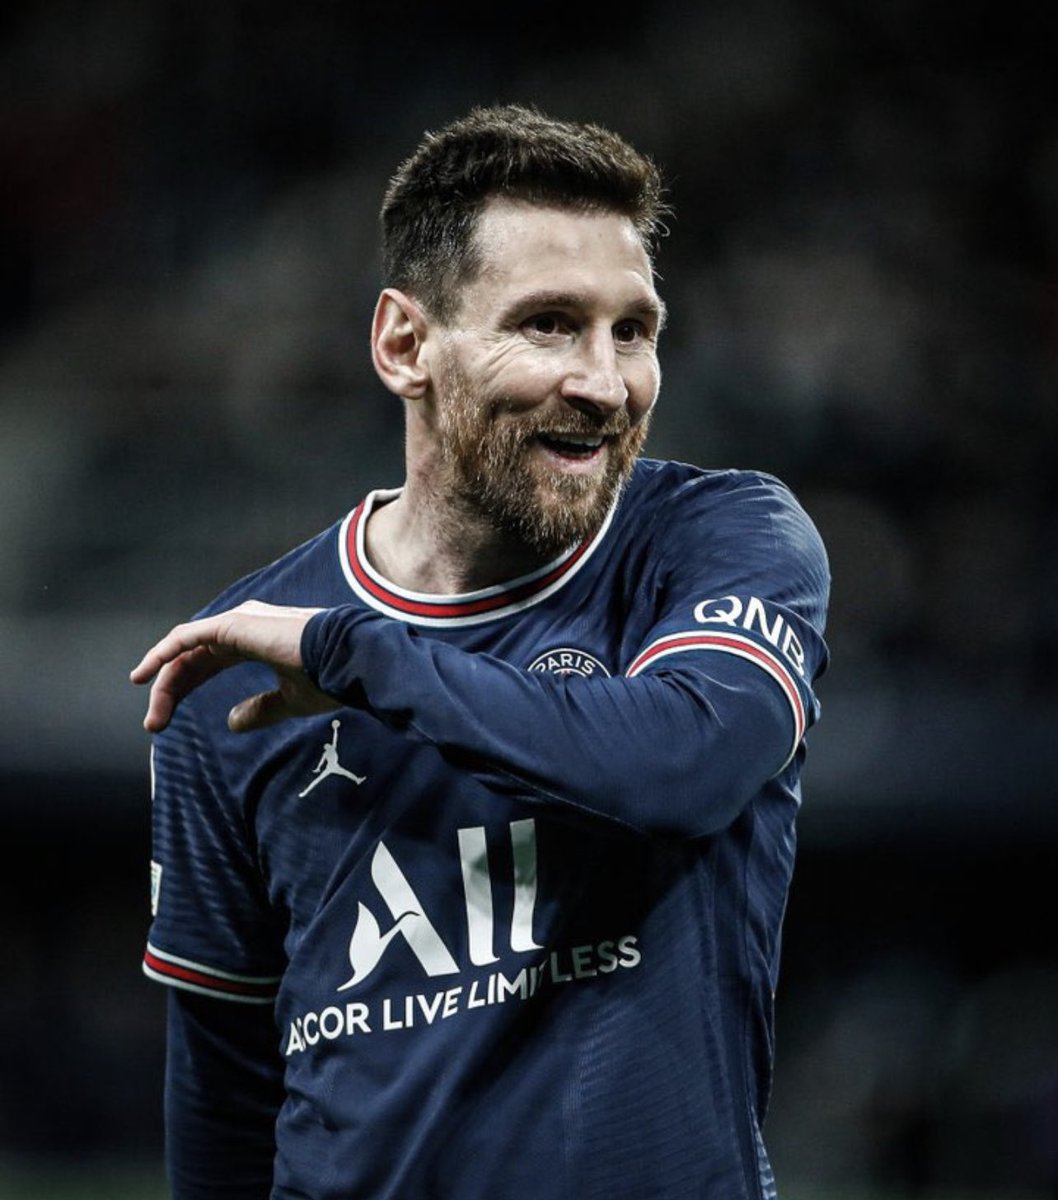 🚨 PSG manager Christophe Galtier has just confirmed that Leo Messi will leave PSG at the end of the season.

“I had a privilege of coaching the best player in the history of football. It will be Leo’s last match at the Parc des Princes against Clermont”.